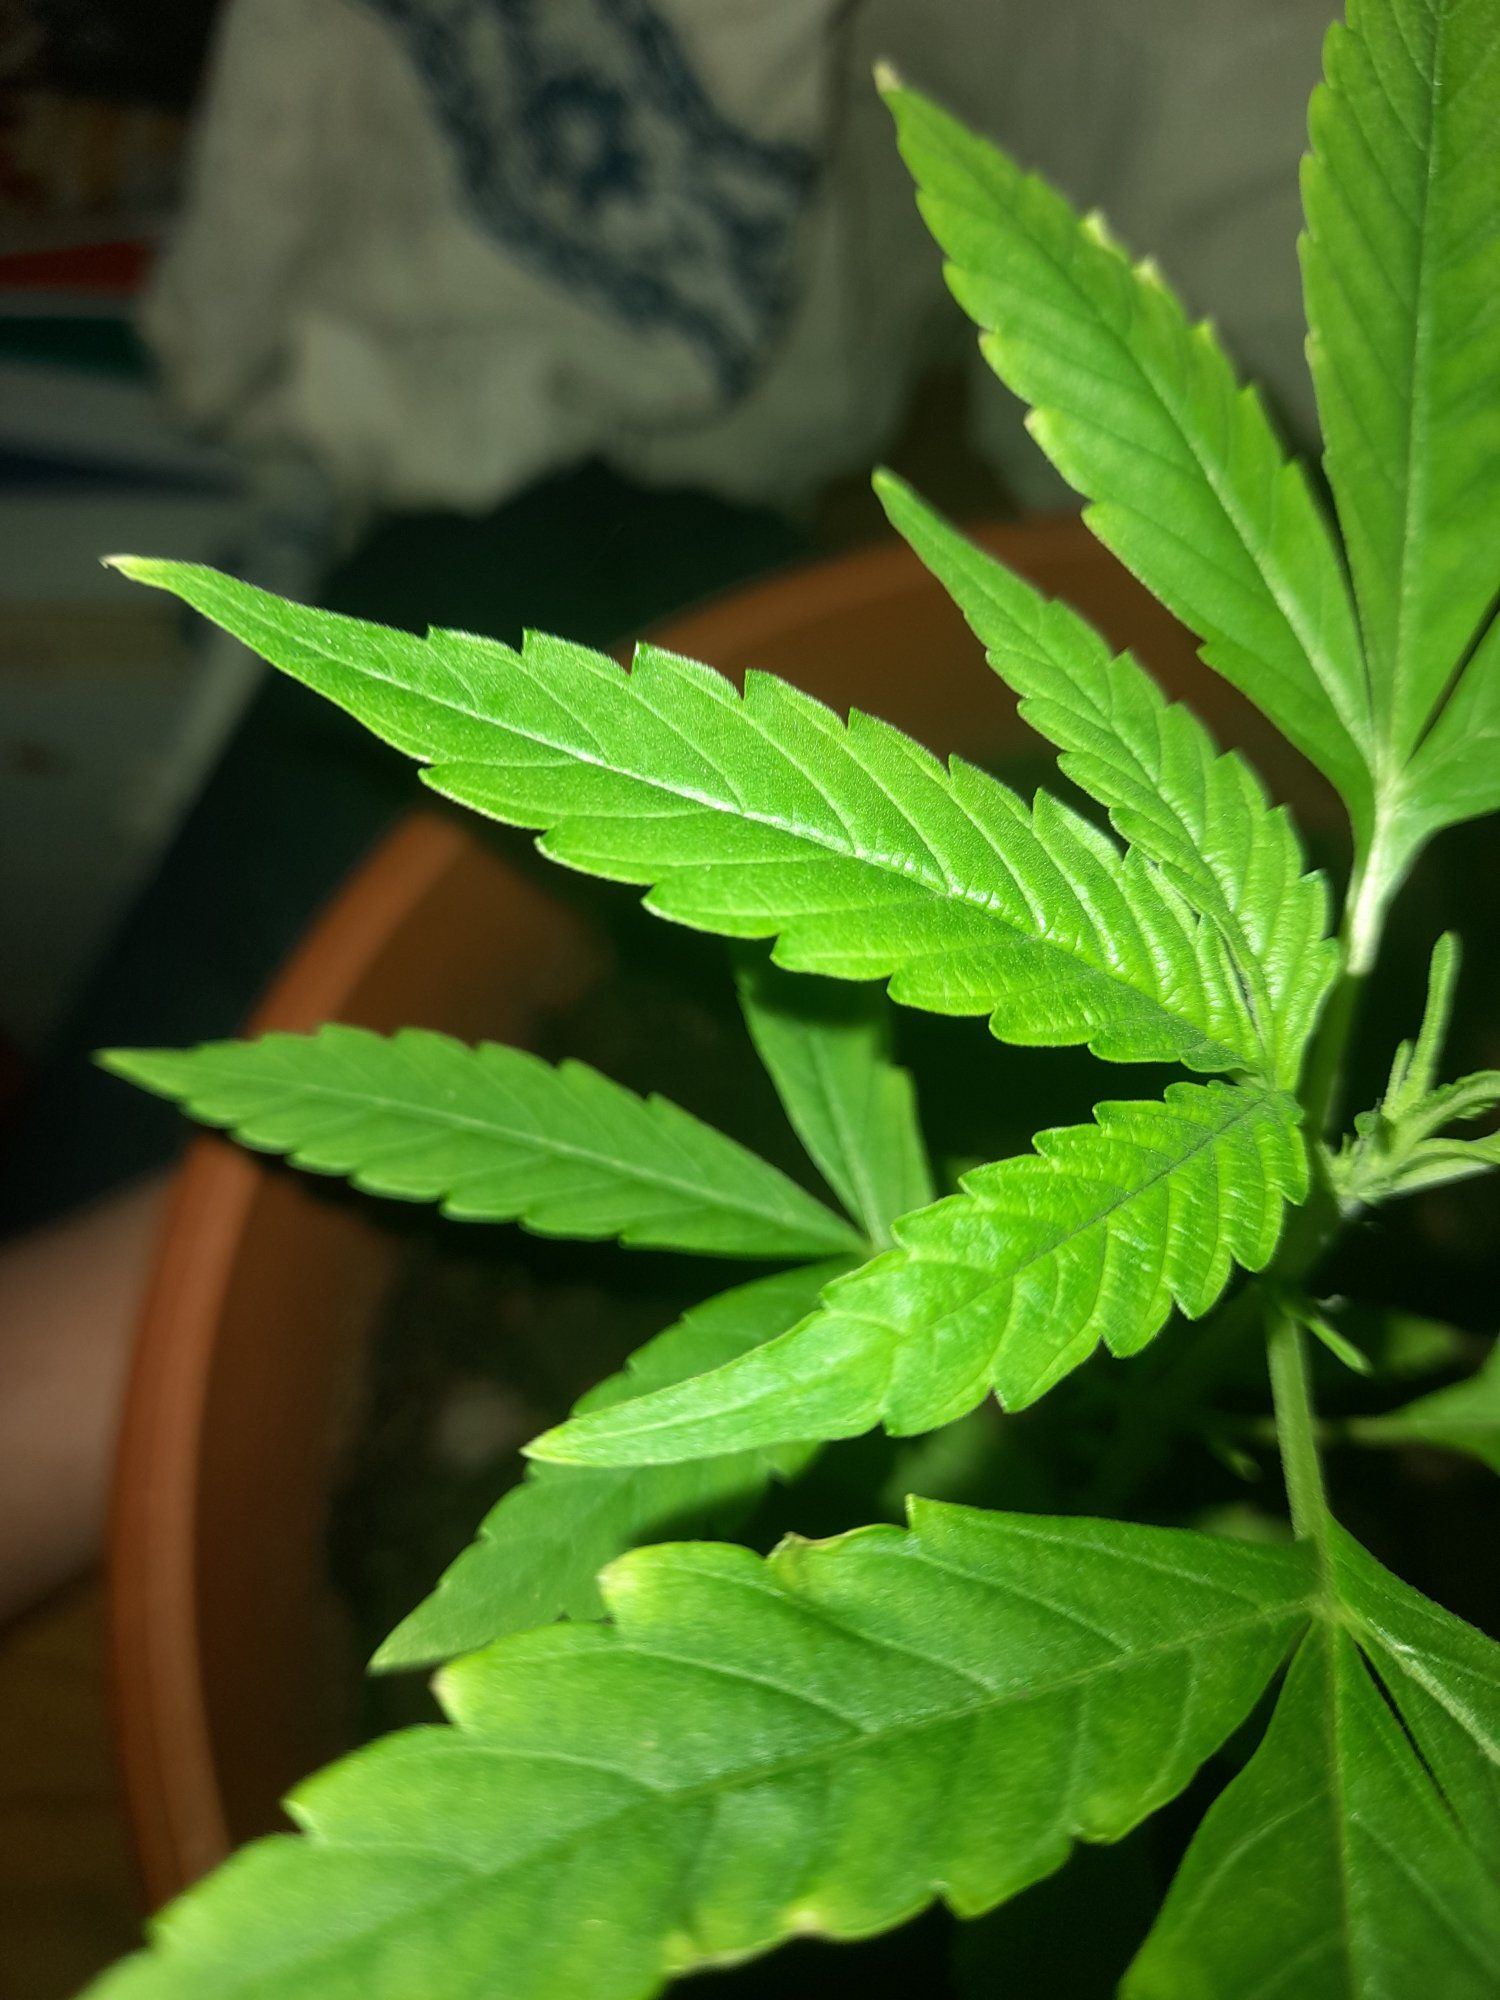 Help if possible the tip of the leaves started to die out and some of the leaves have wrinkles